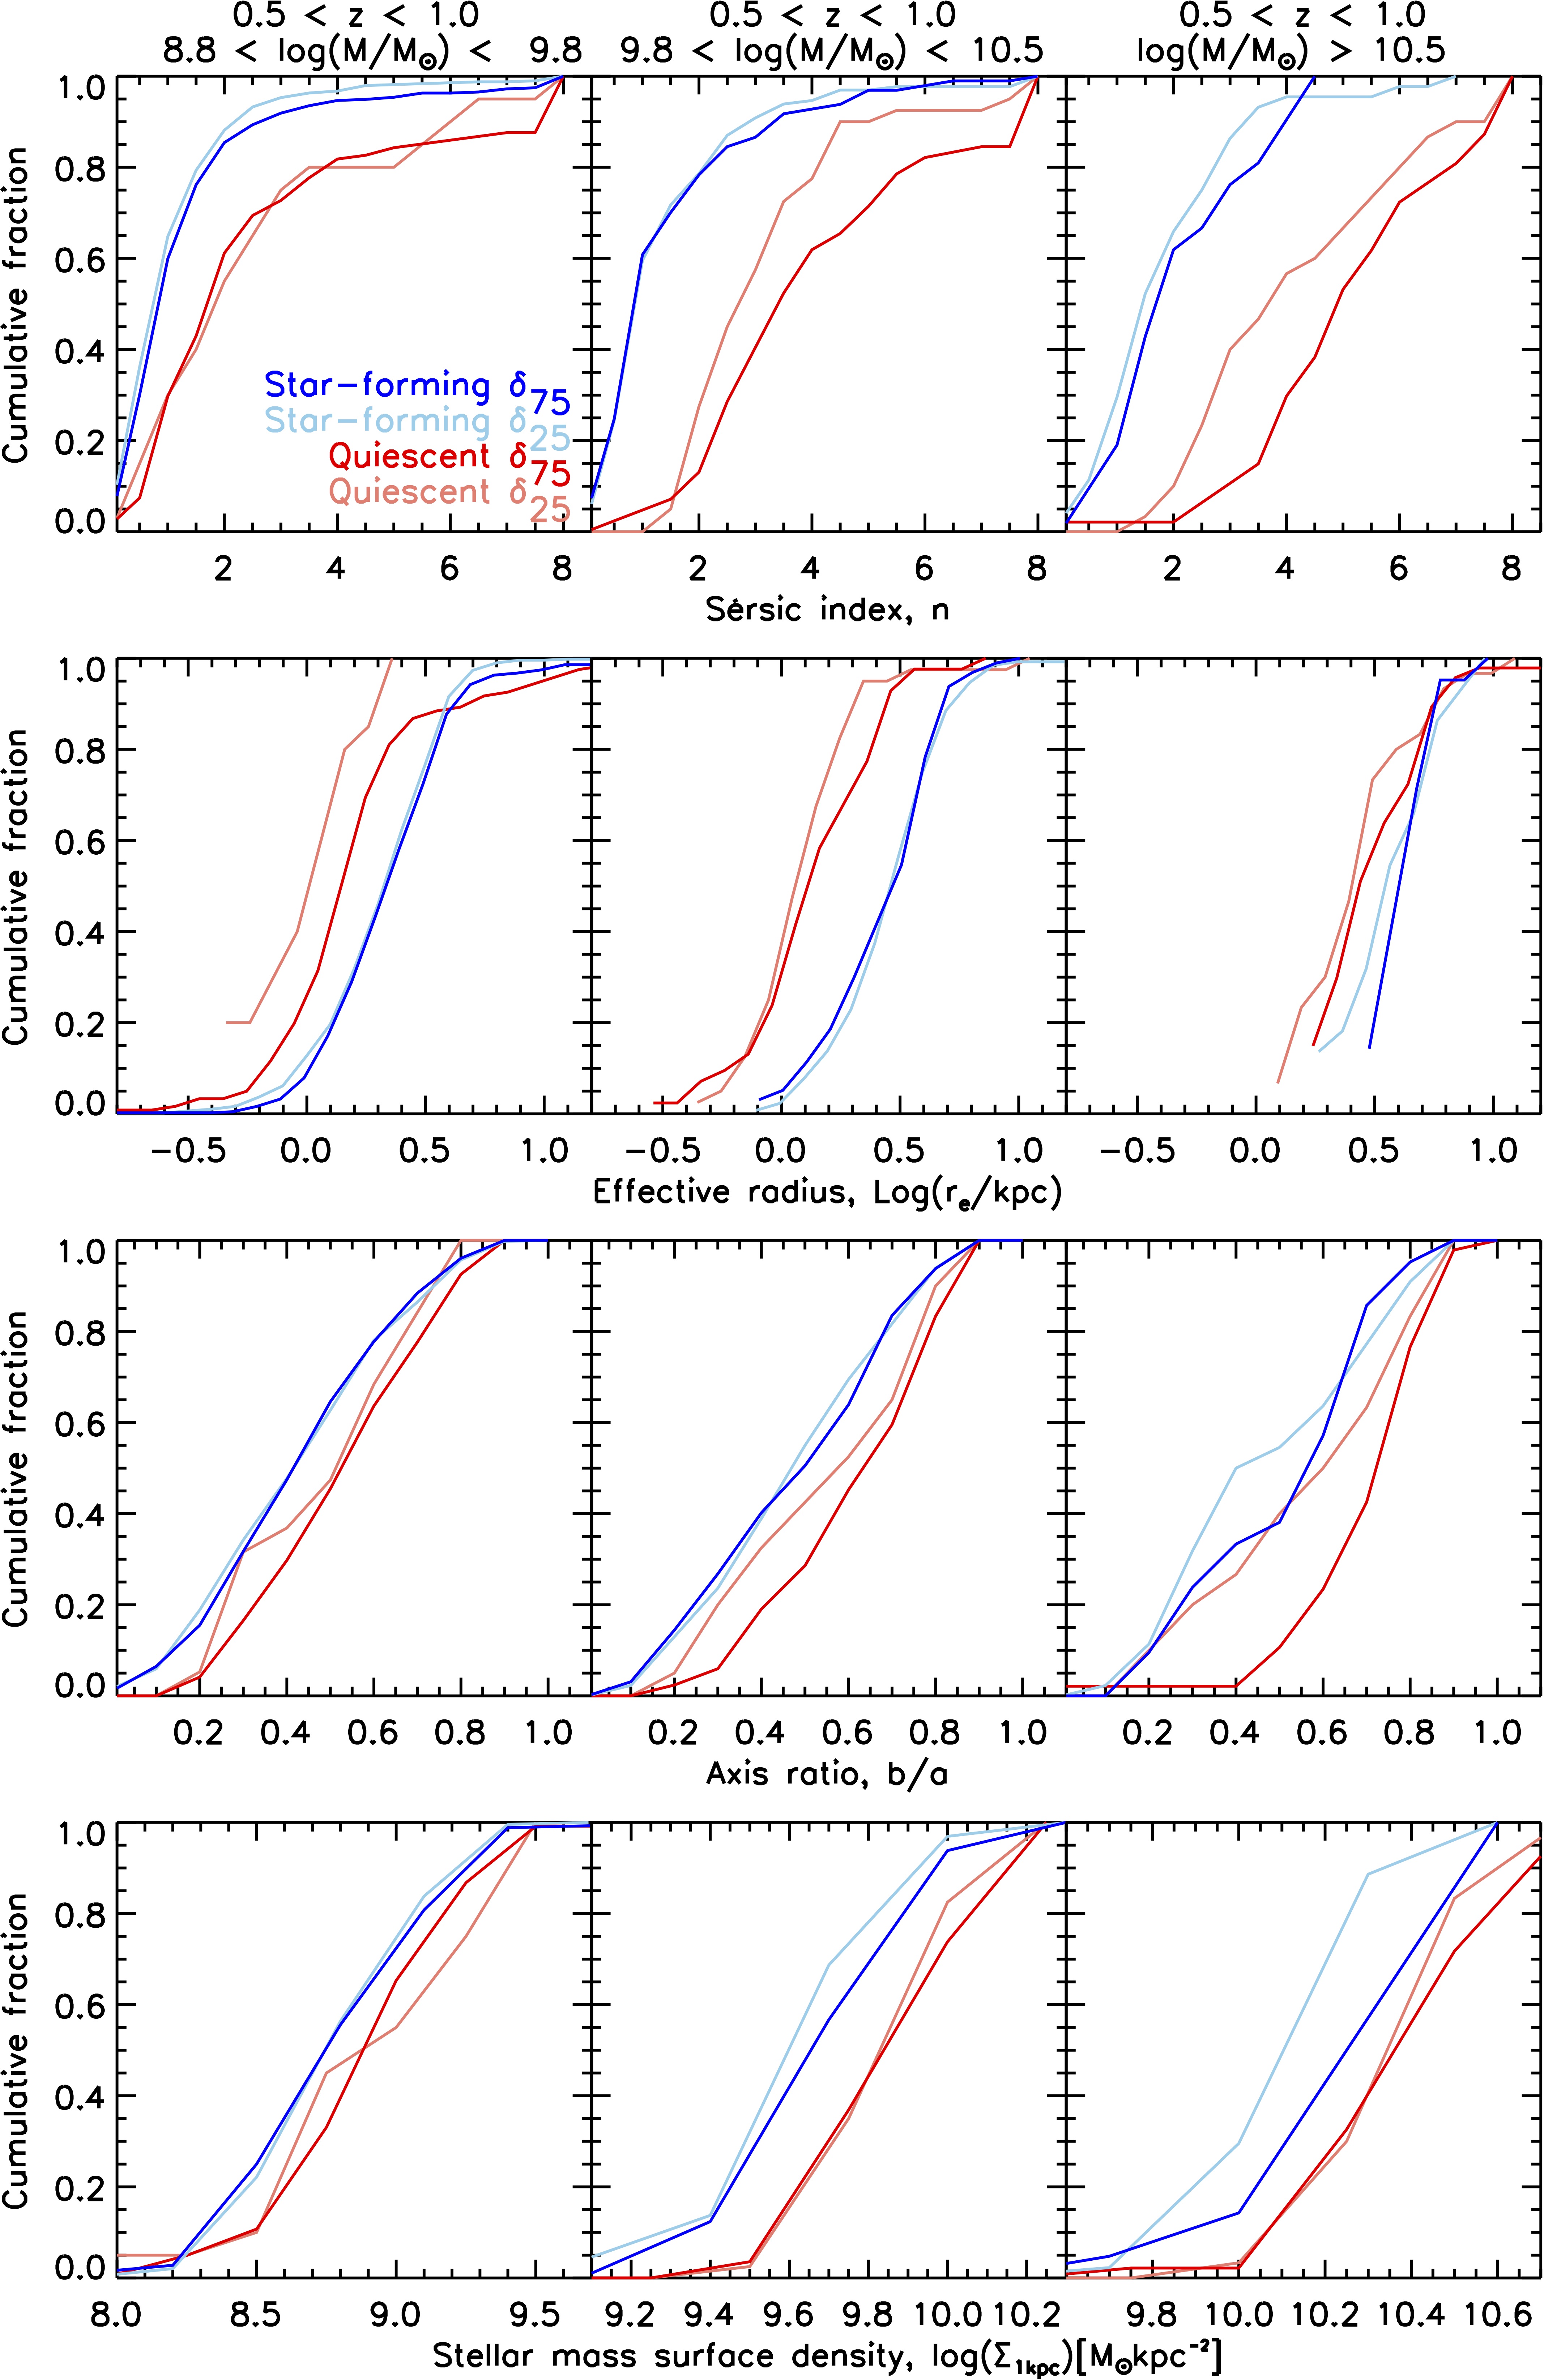 The cumulative distribution of Sérsic index (top row), effective radius (second row), axis ratio (third row), and stellar mass surface density in inner 1 kpc (bottom row) for quiescent galaxies in the lowest-density quartile (δ25; light-red)